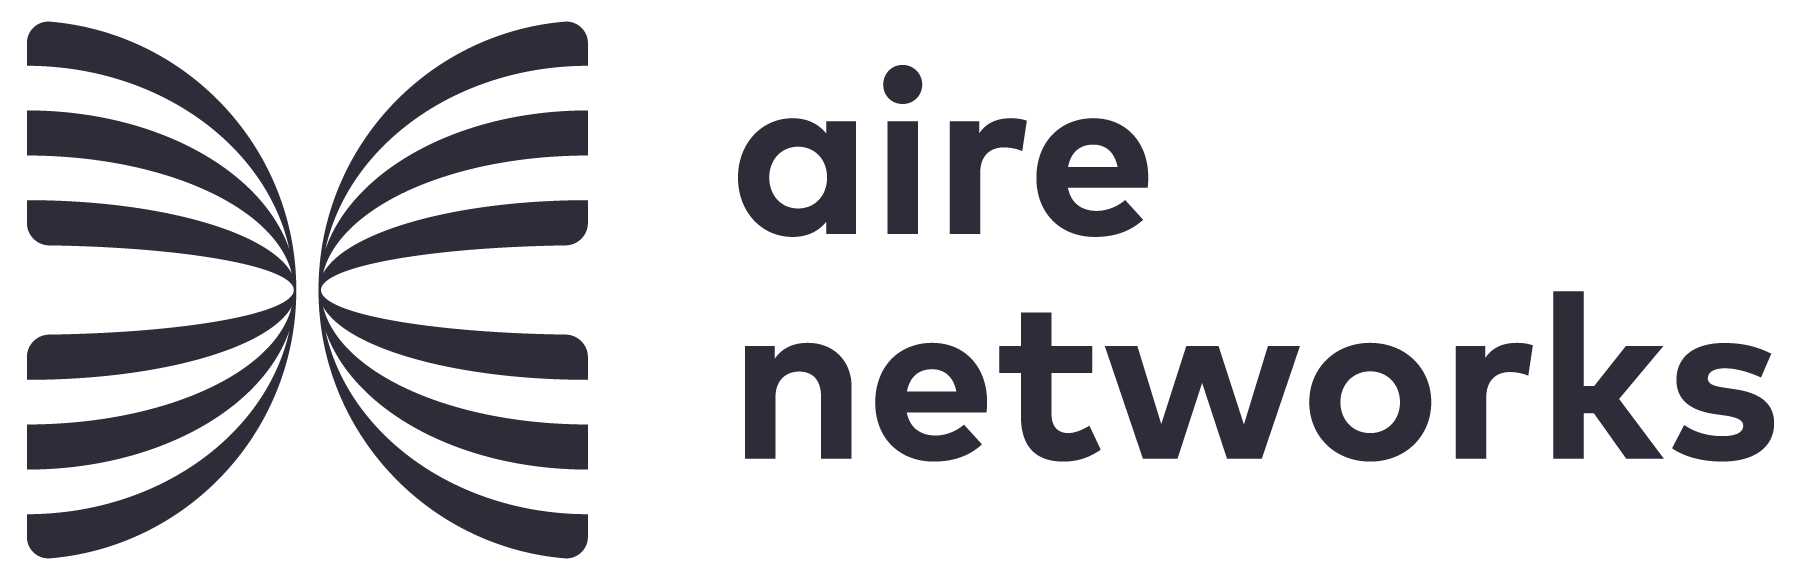 aire networks logo